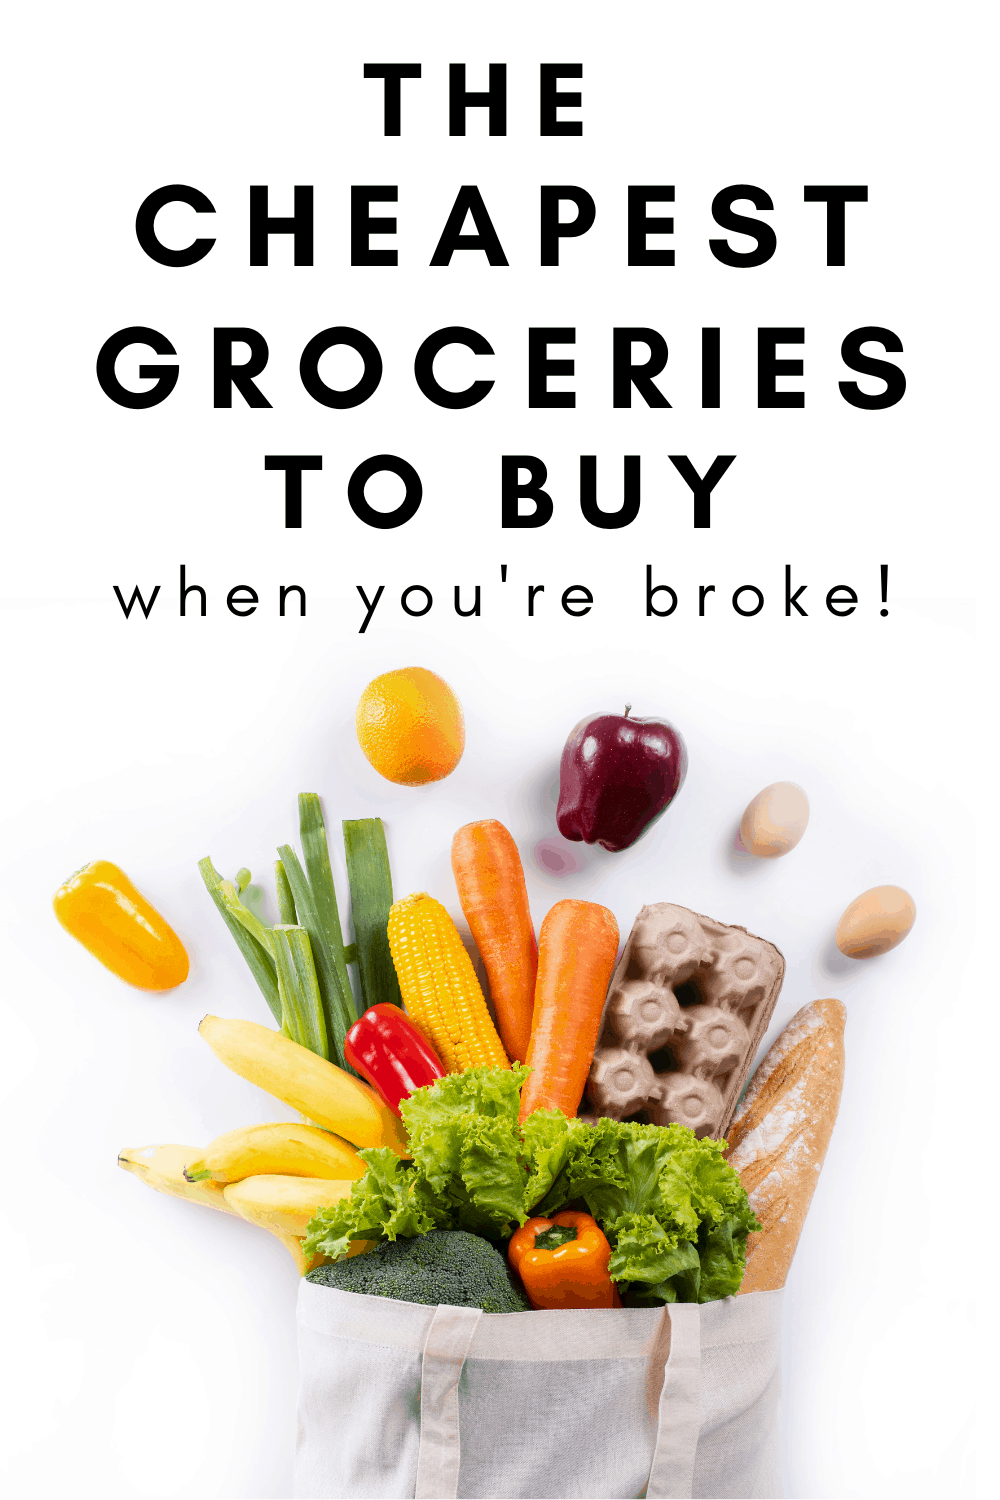 How To Buy Food Cheaply